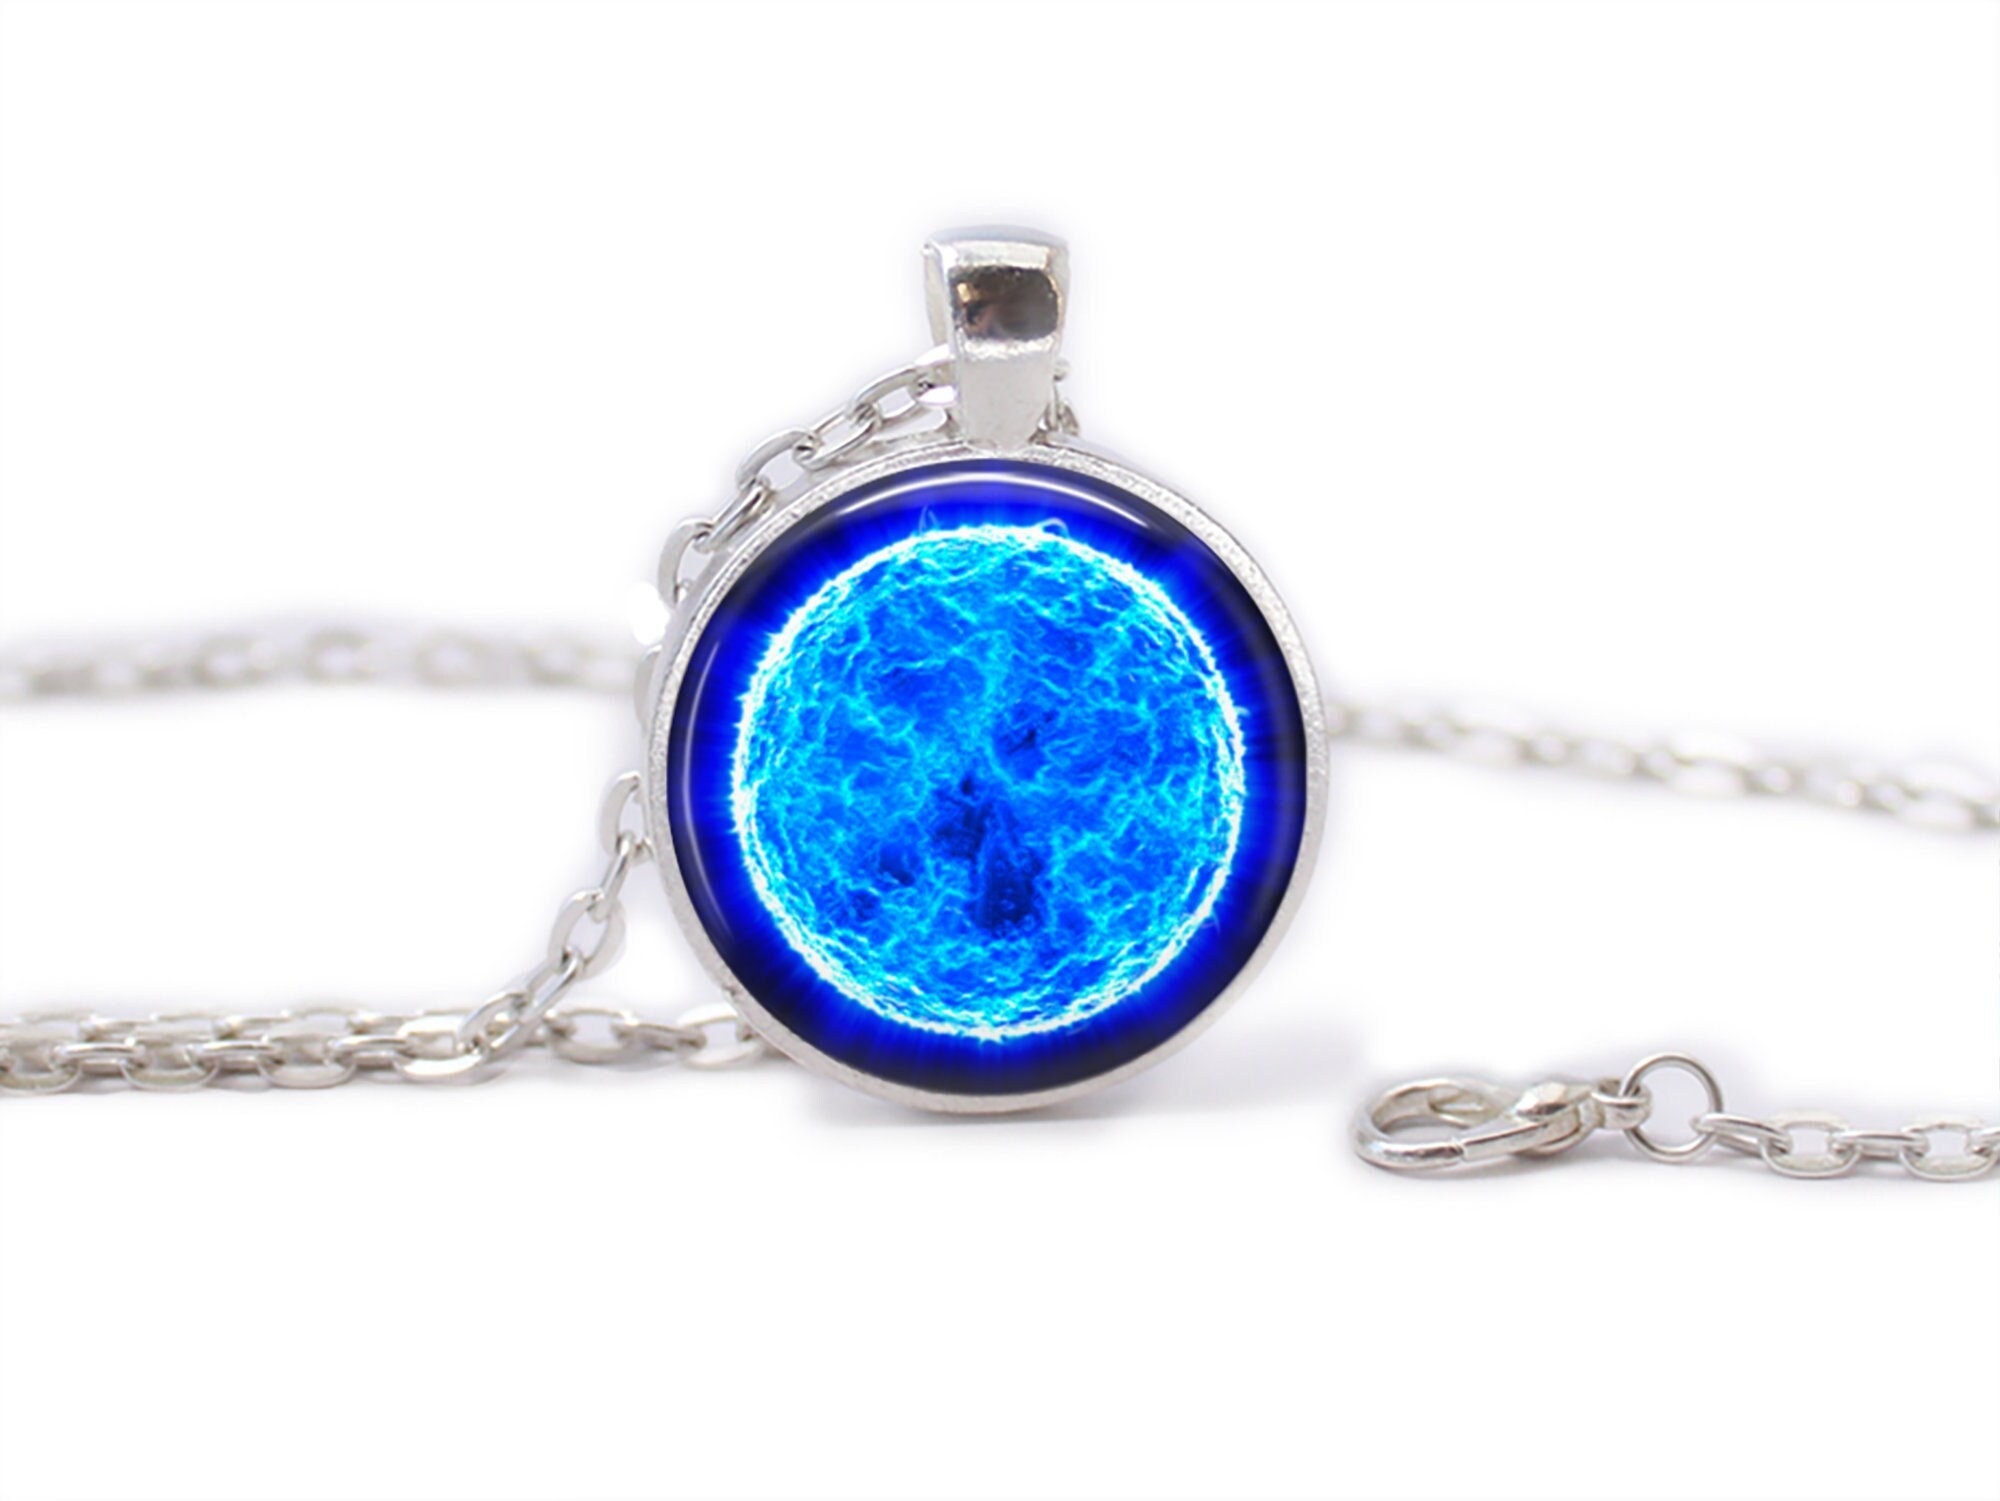 Glow in The Dark Galaxy Charm Necklace - Stars Nebula Glowing Galaxy Pendant - 23 Space Images Available, 20mm or 25mm Size